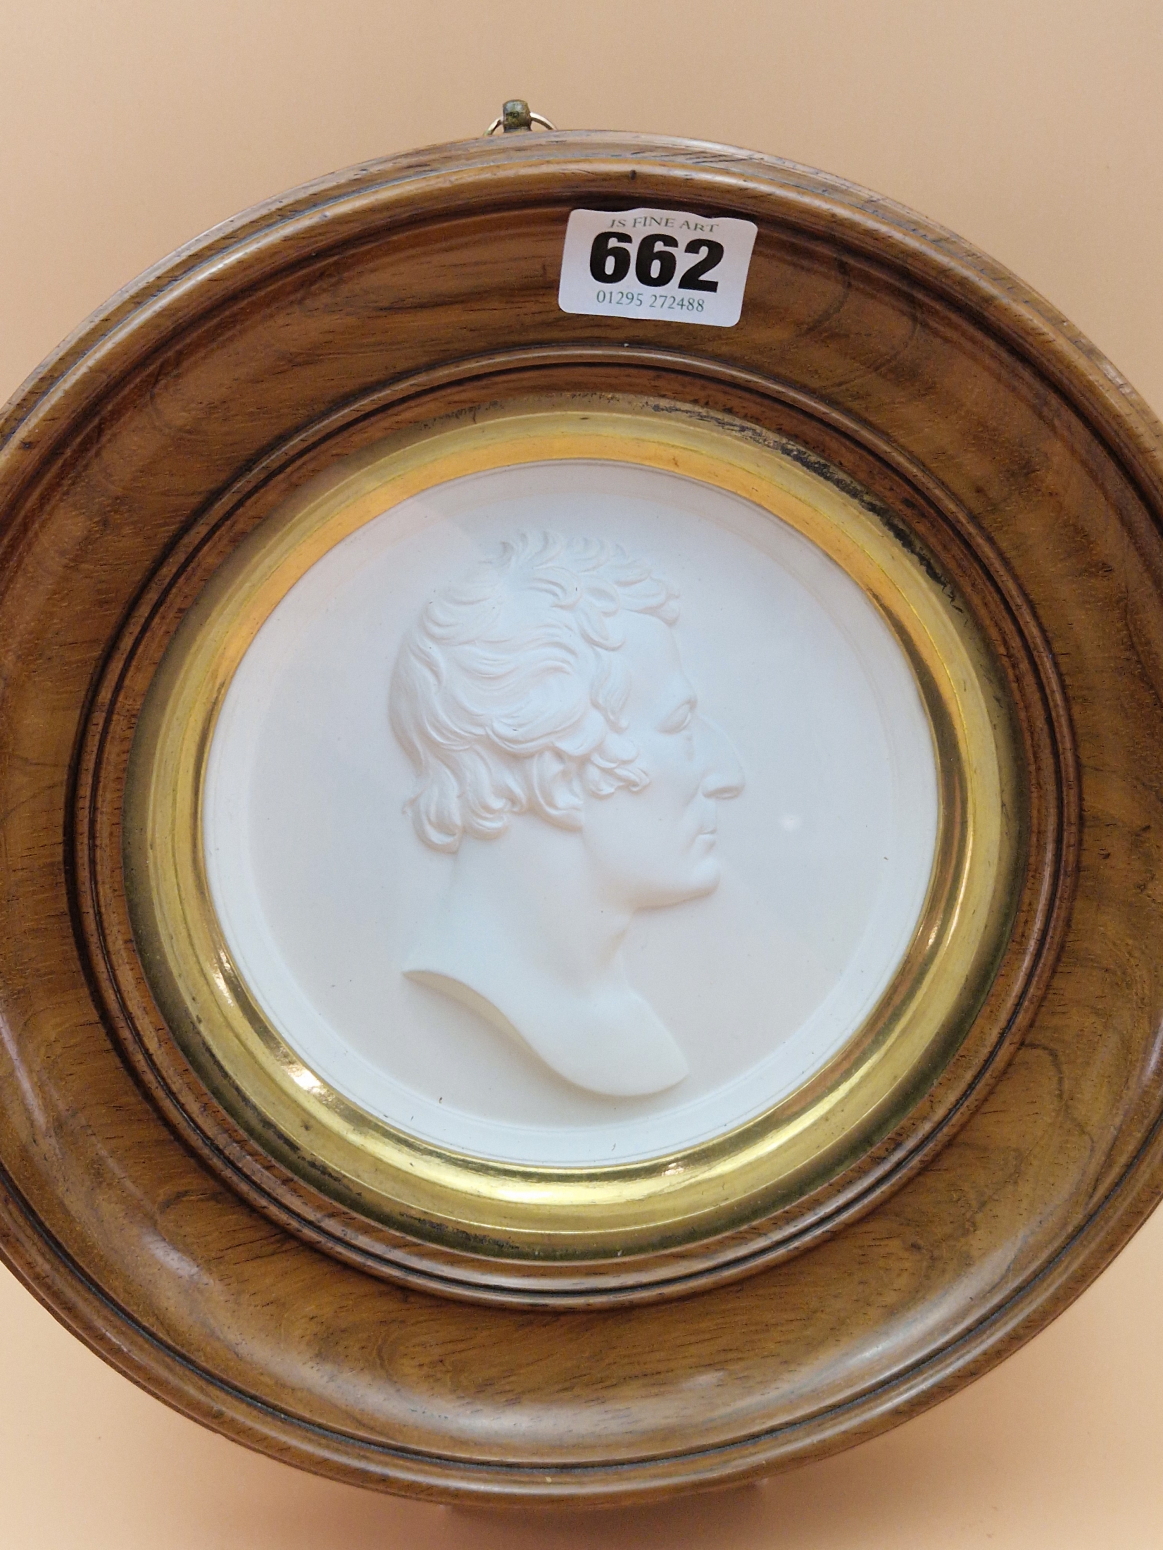 A ROSEWOOD FRAMED WHITE RELIEF ROUNDEL DEPICTING THE HEAD OF THE DUKE OF WELLINGTON. Dia. 24.5cms. - Image 4 of 6